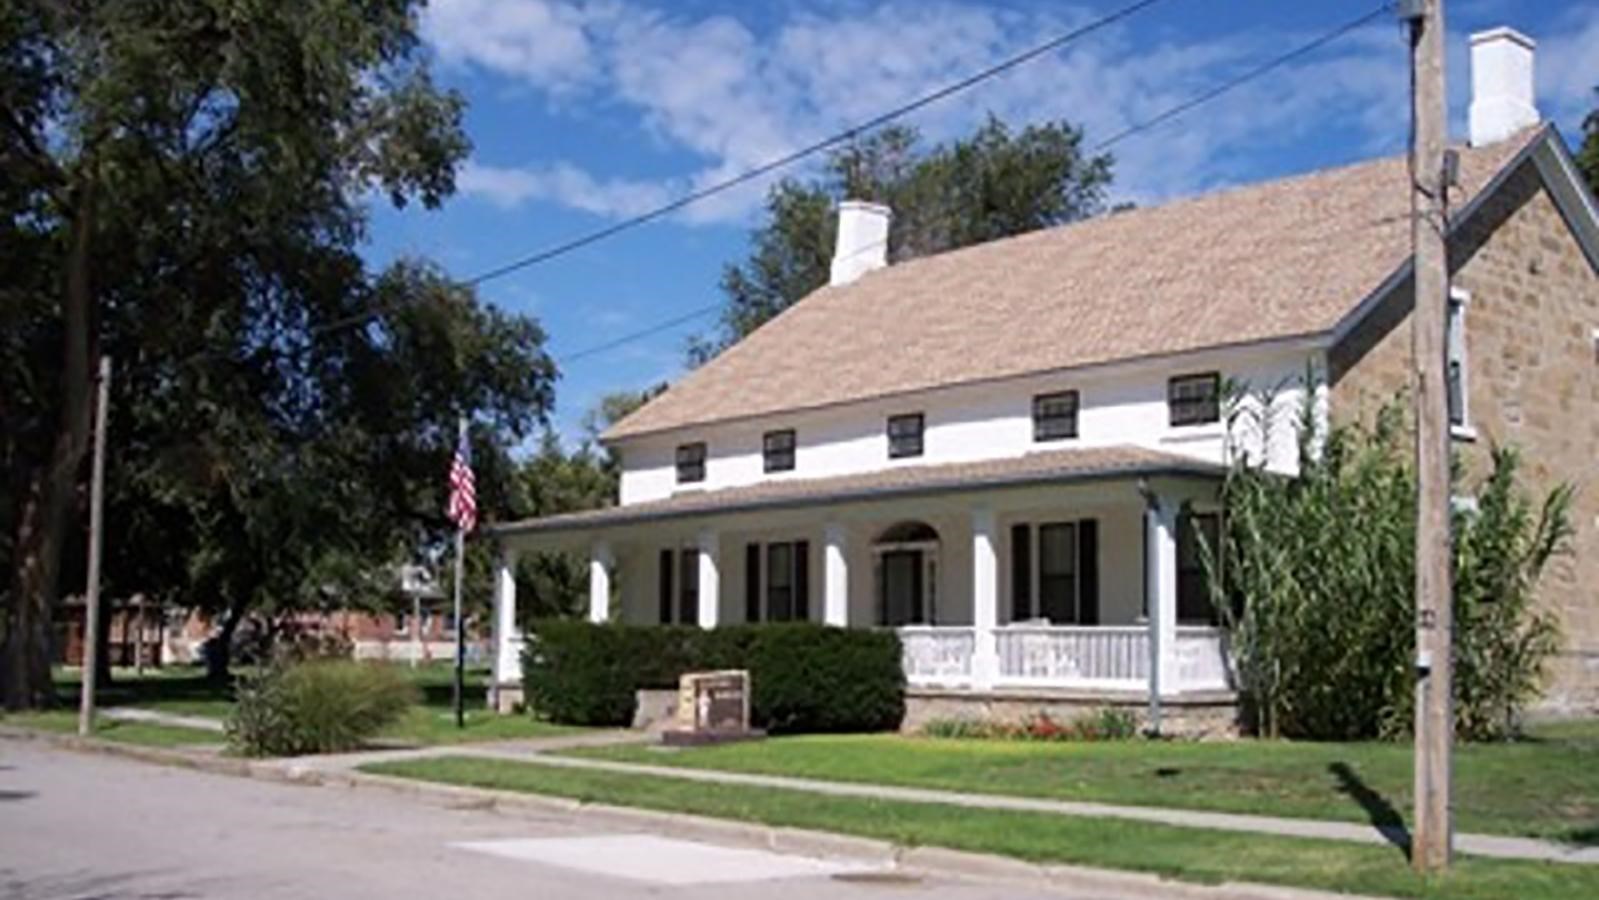 Stone building with porch and grassy lawn. Blue skies, trees, American flag also present.